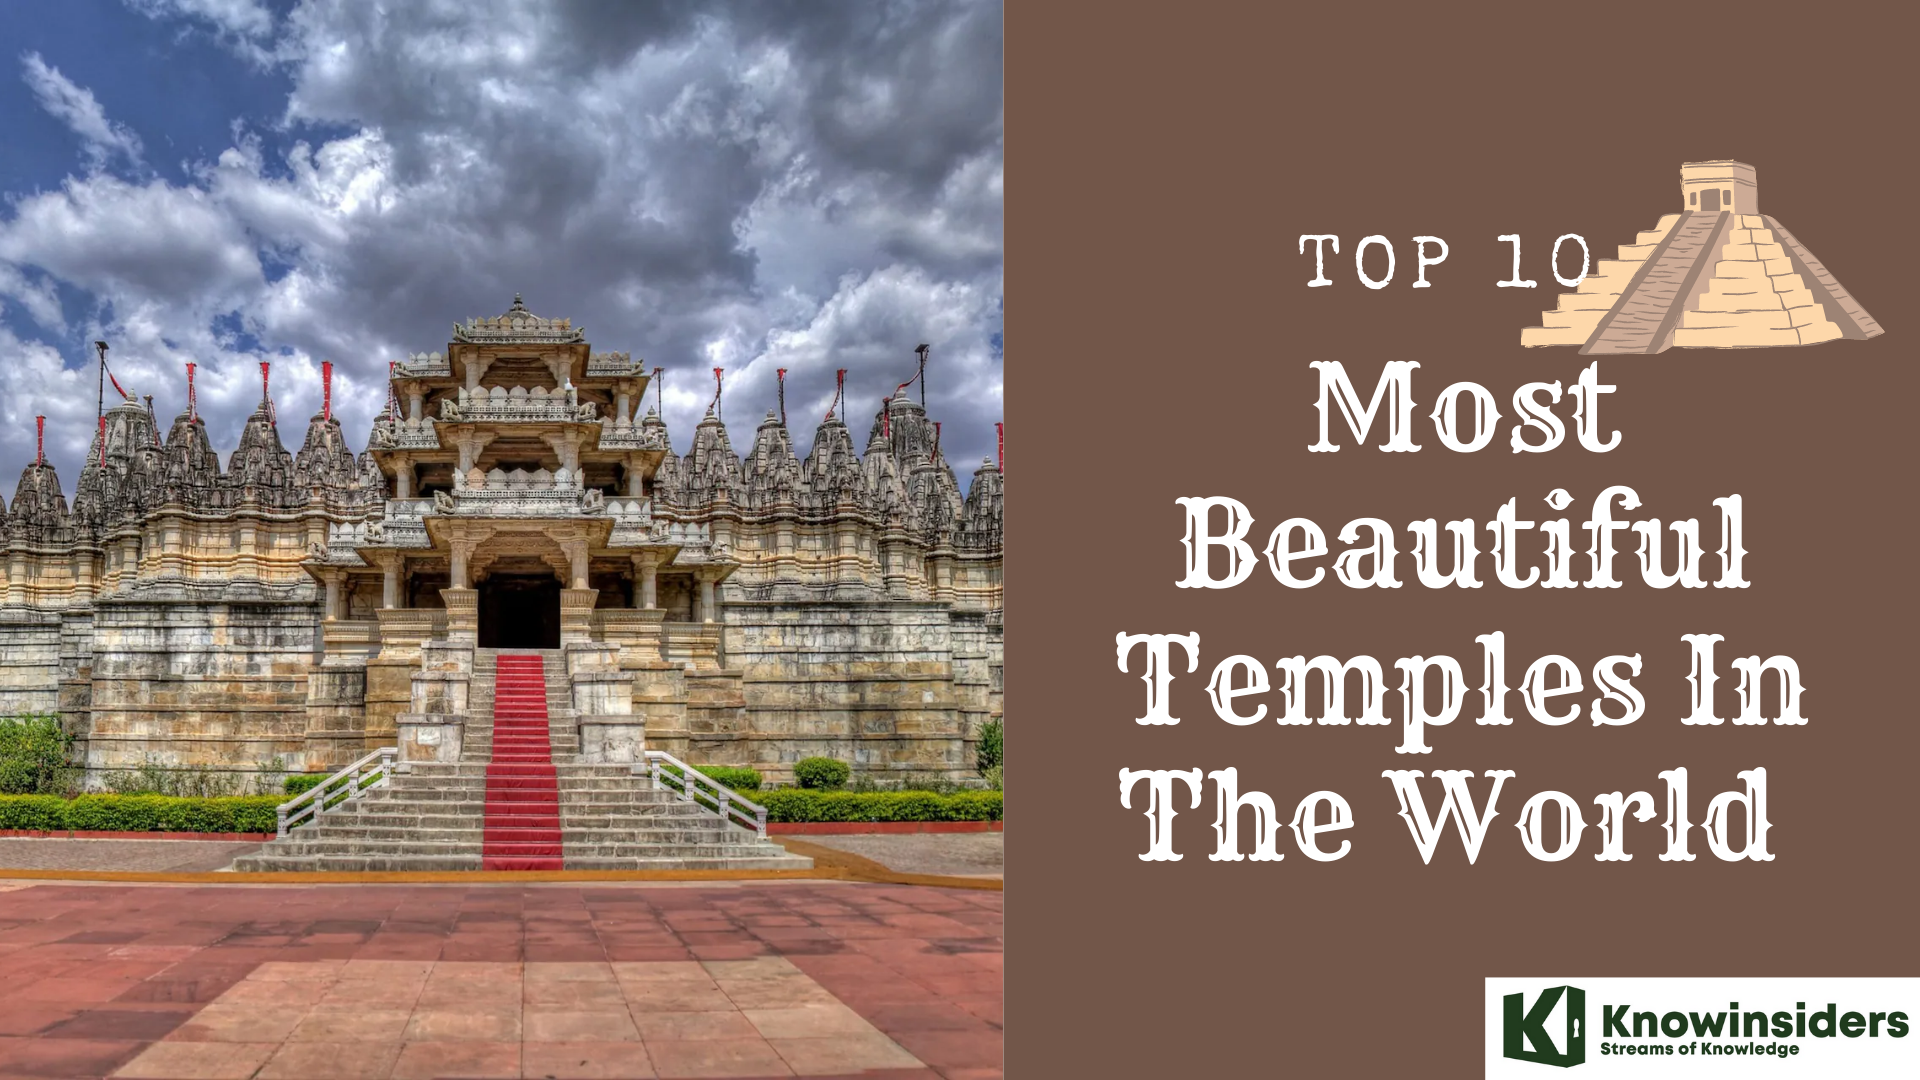 Top 10 most beautiful temples in the world 